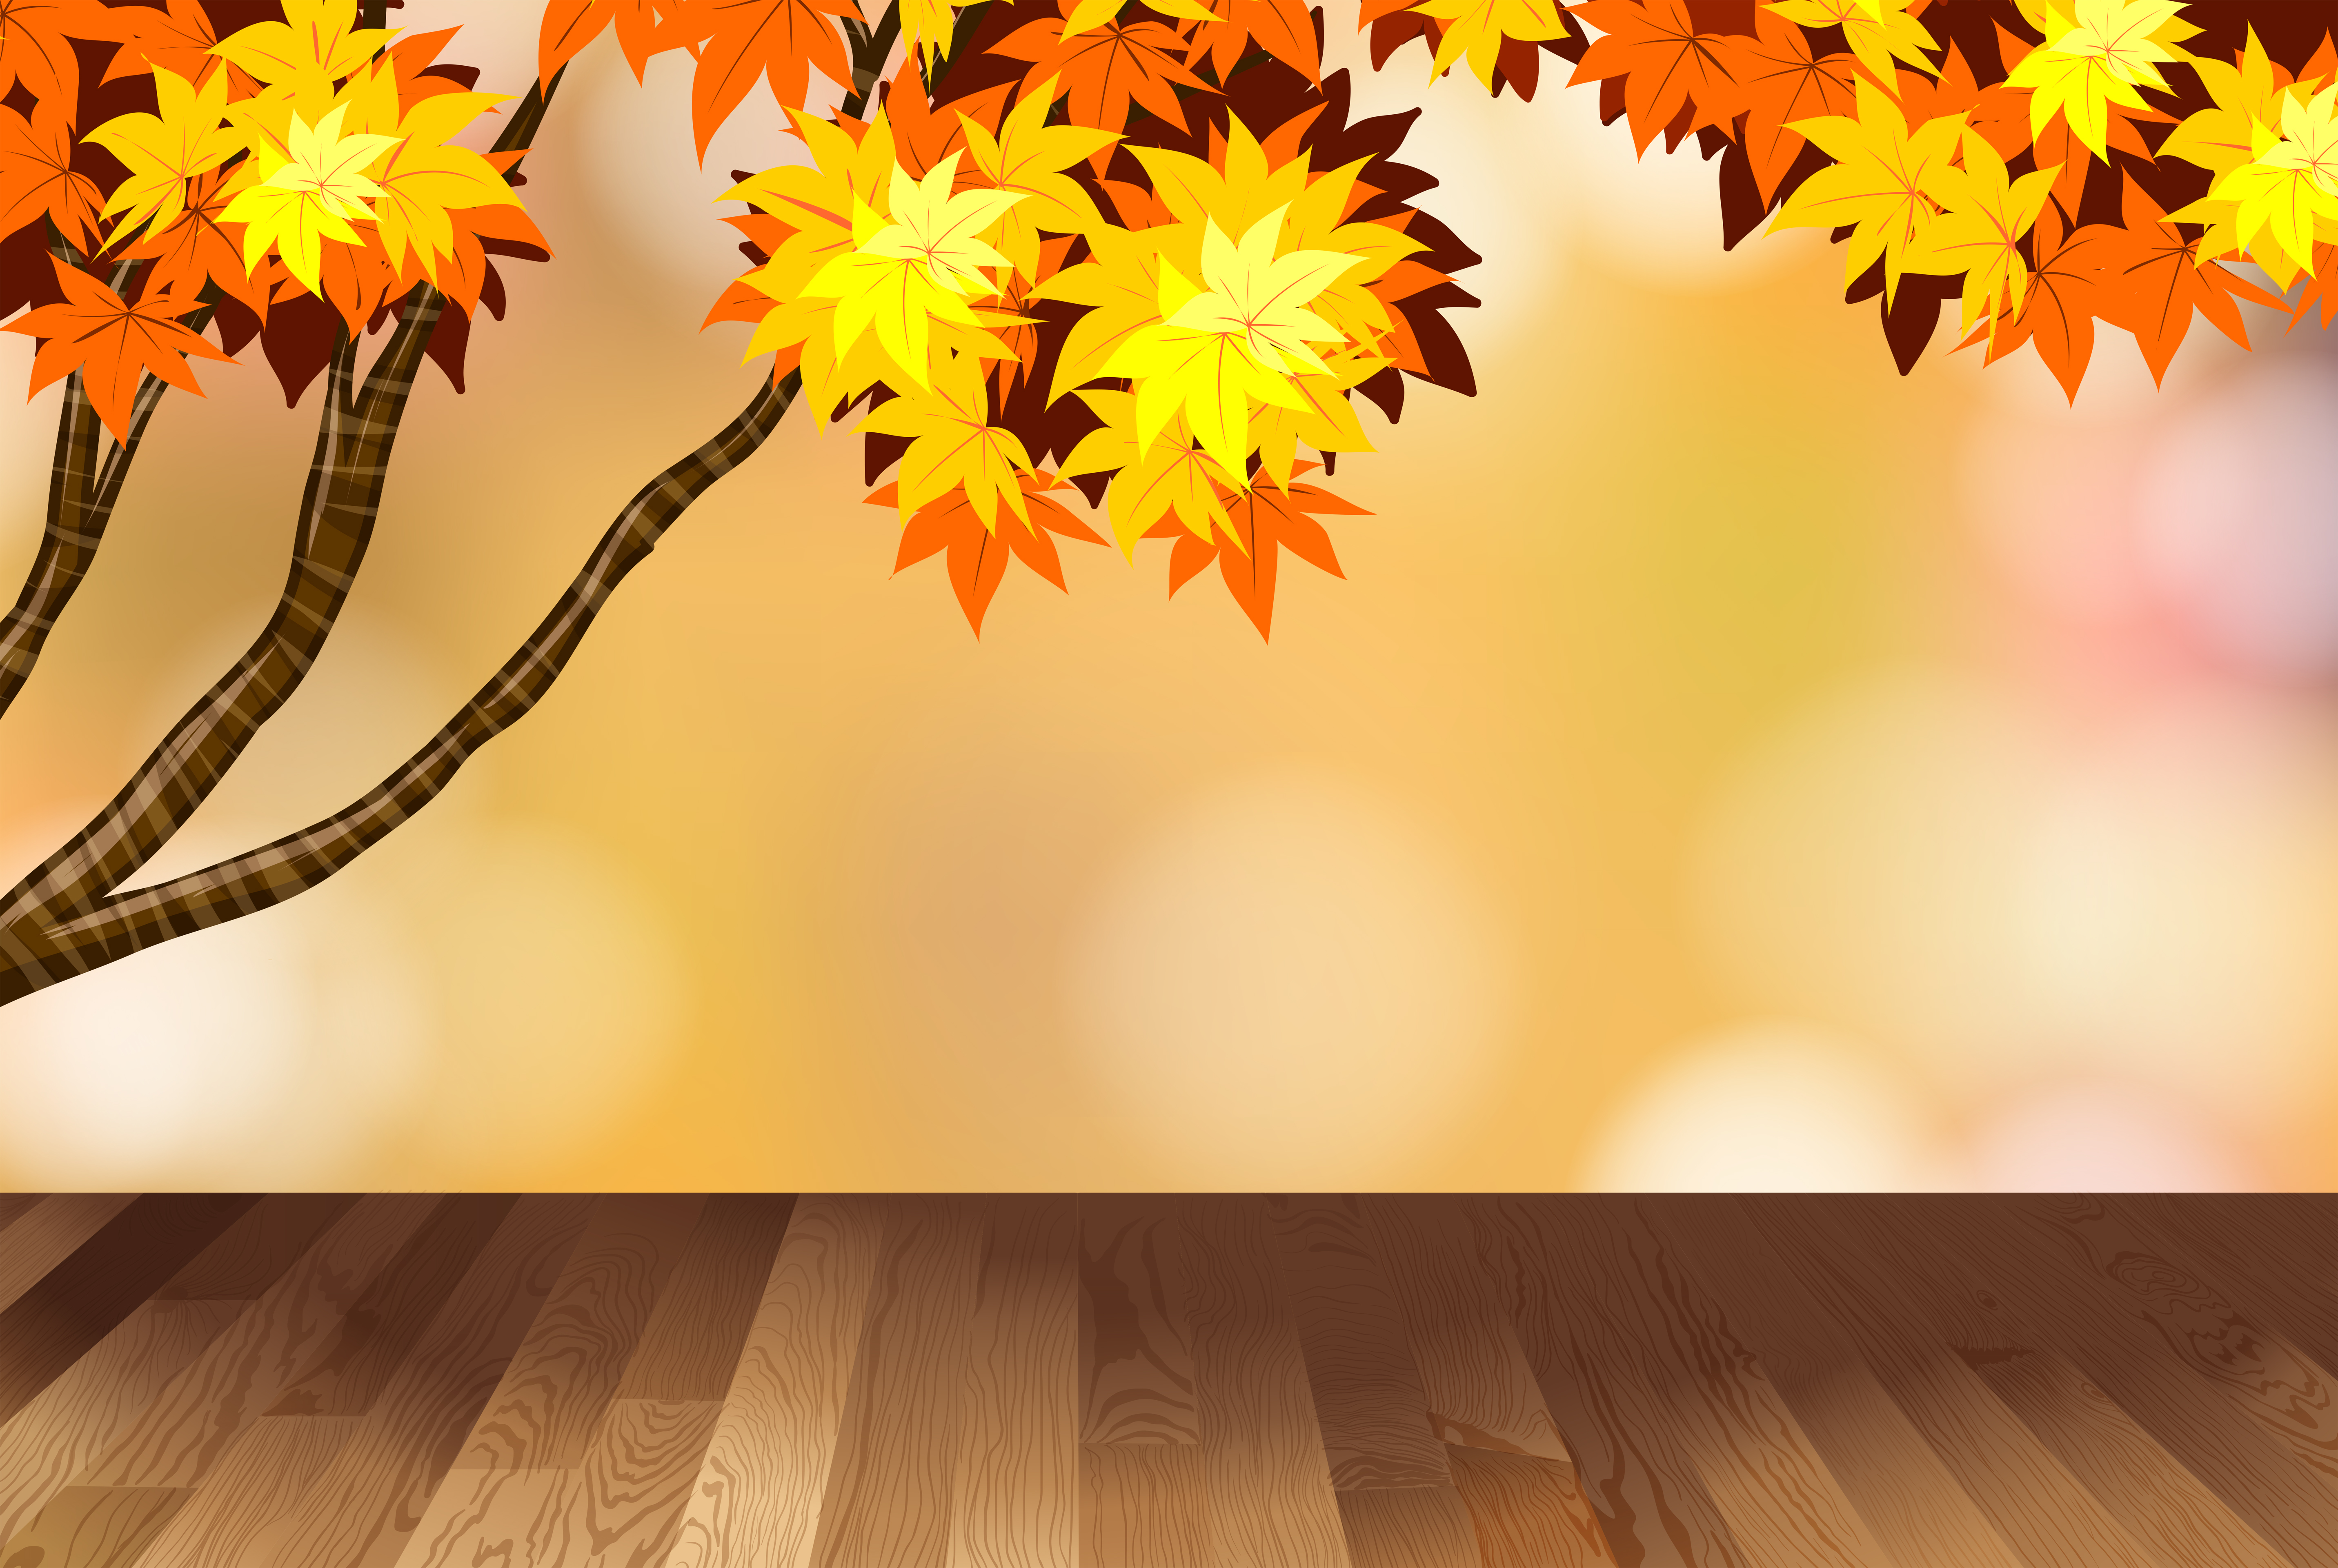 Background Design With Yellow Leaves On Tree Download Free Vectors